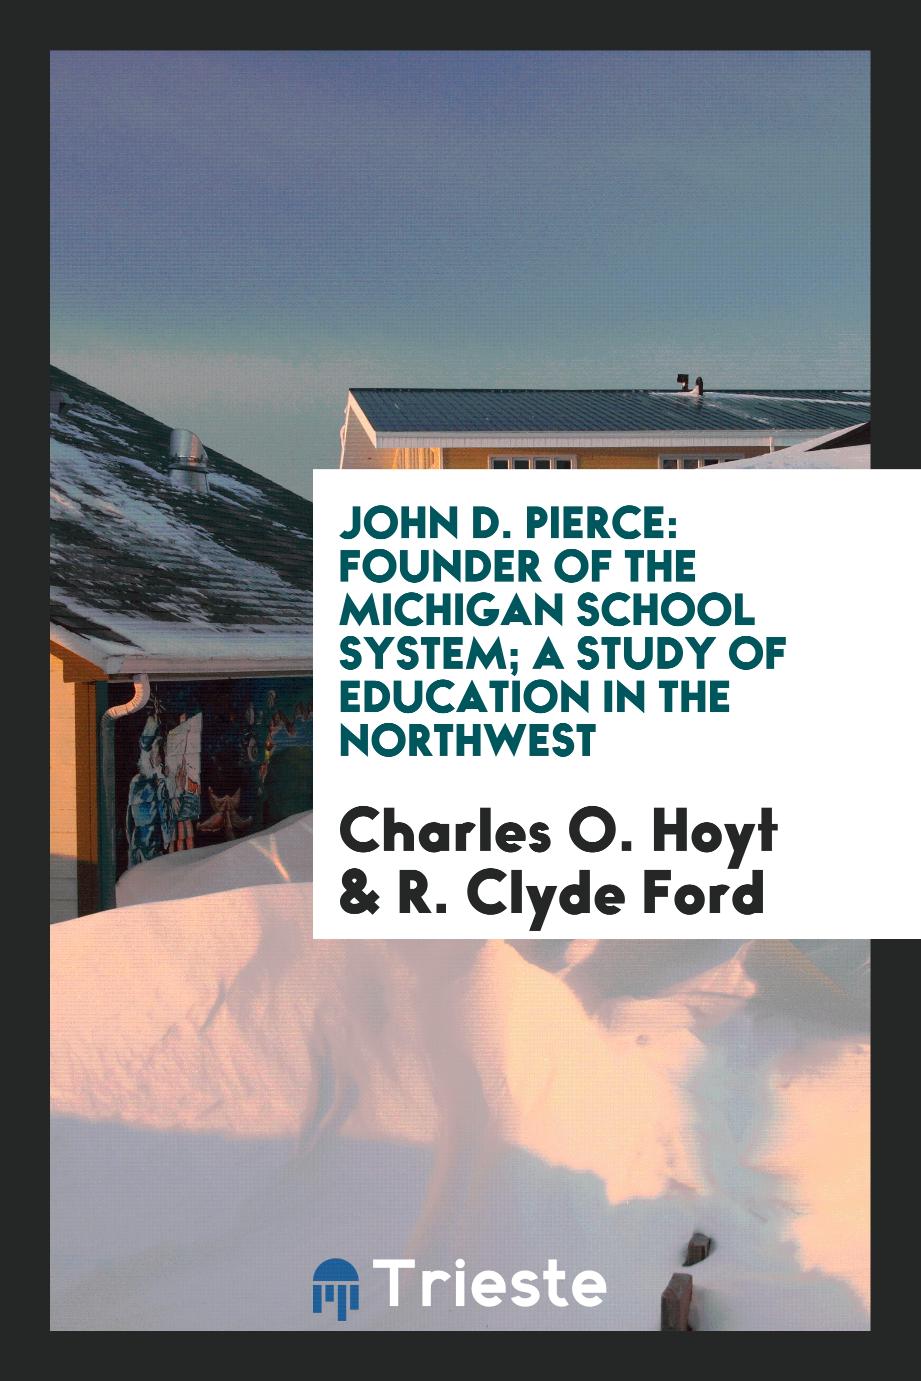 John D. Pierce: Founder of the Michigan School System; A Study of Education in the Northwest